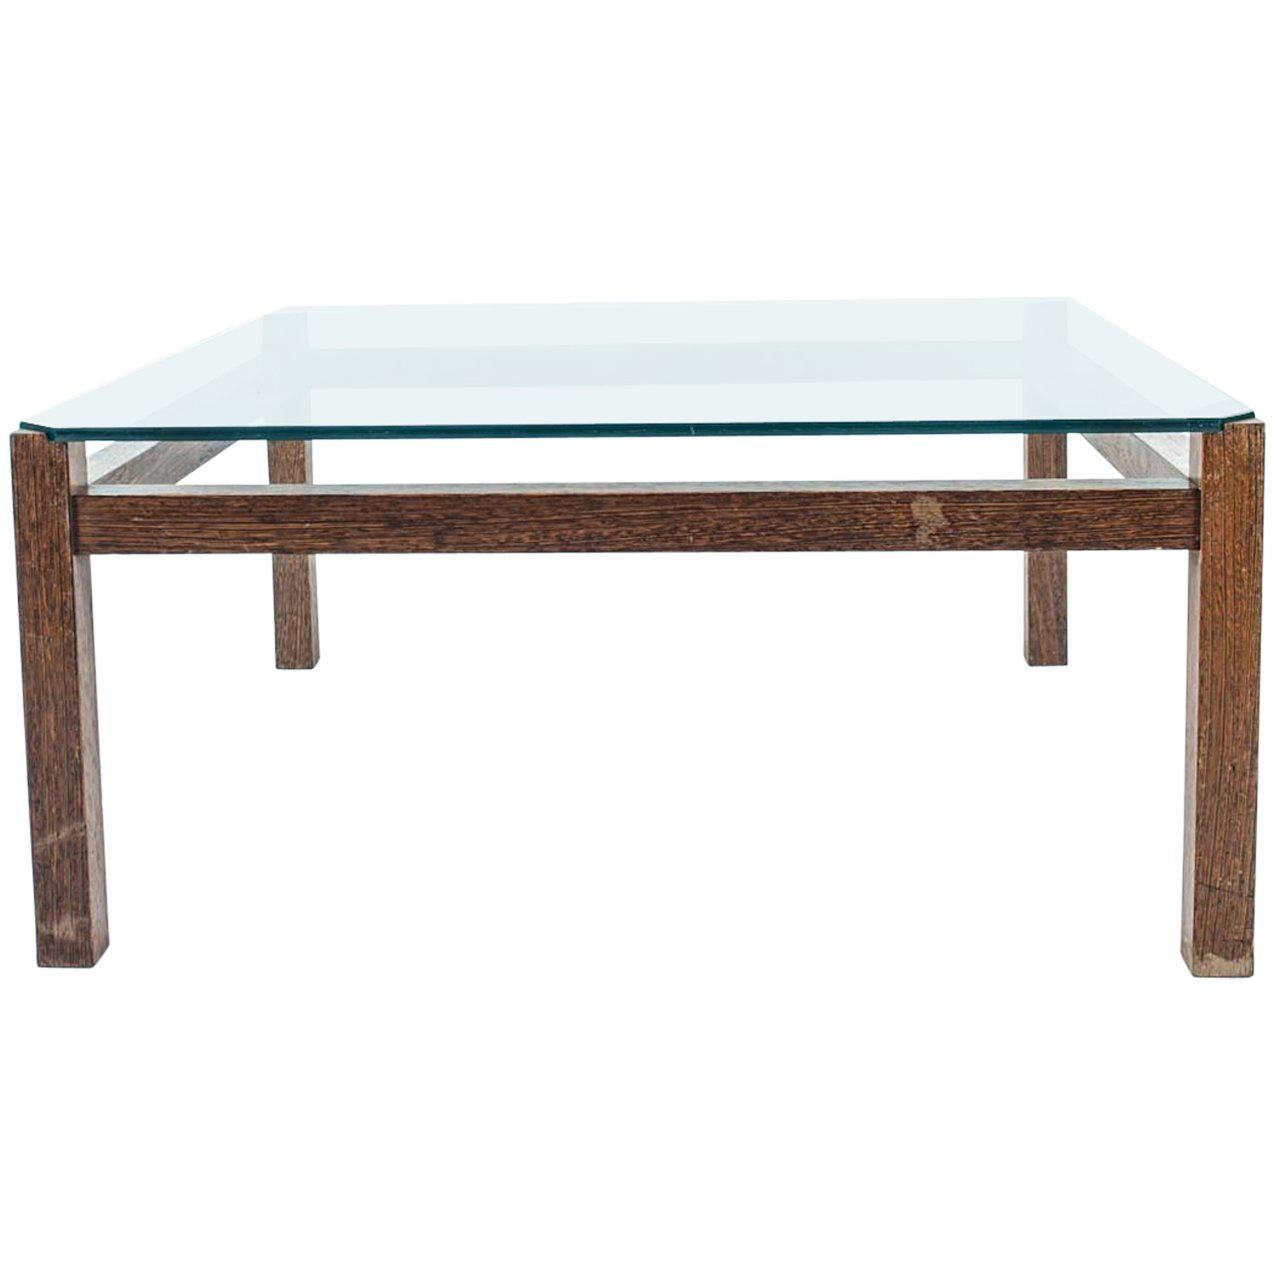 Midcentury Wengé and Glass Coffee Table designed by Kho Liang Ie for Artifort